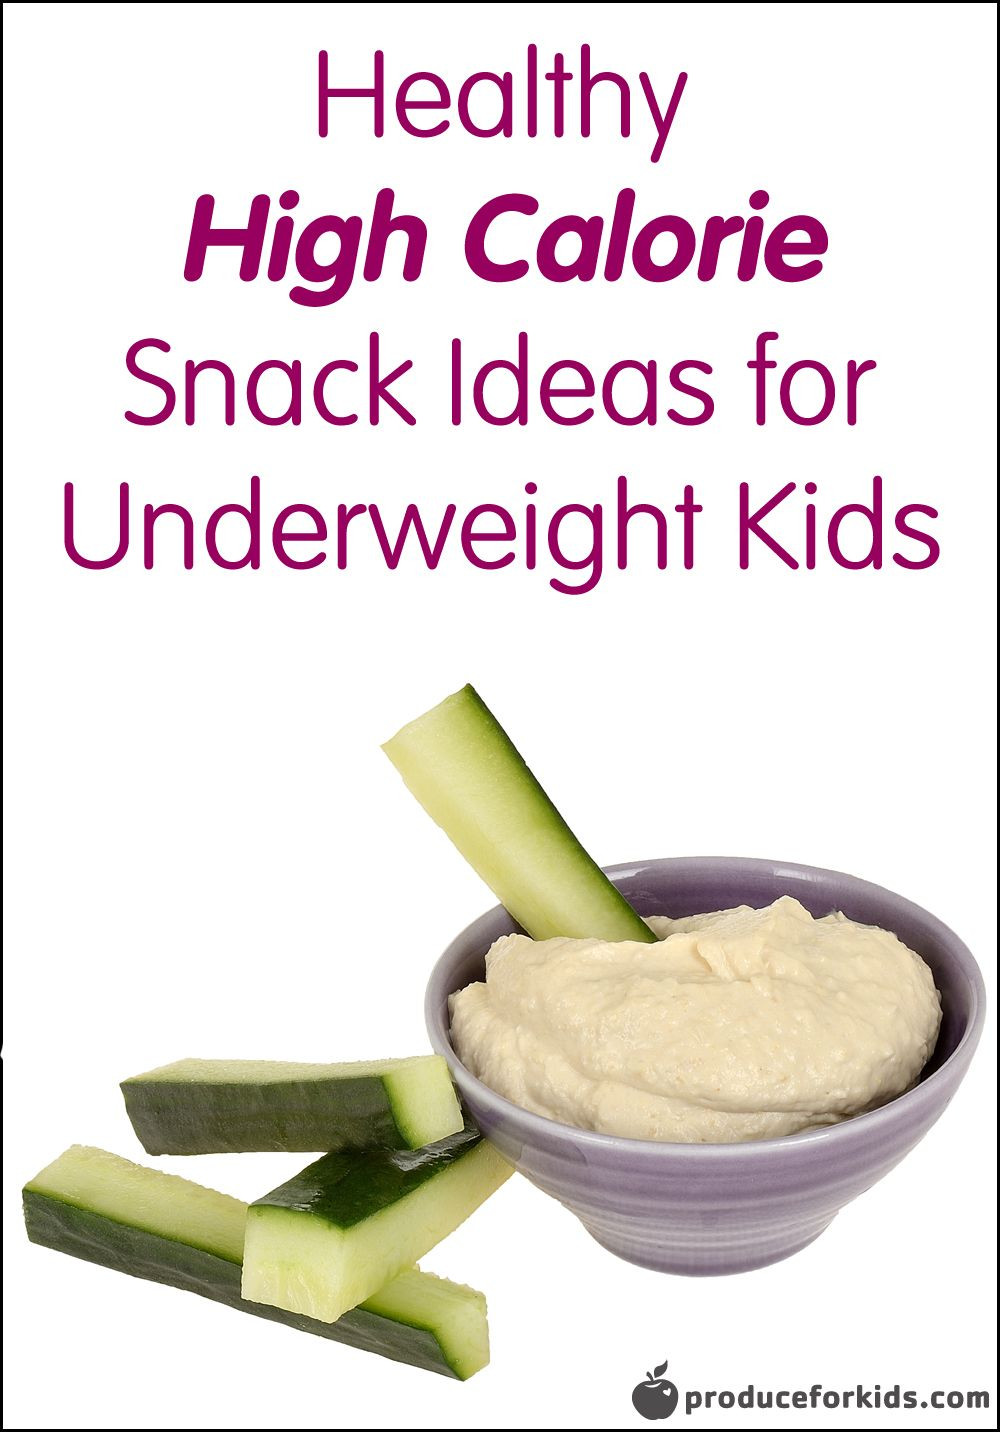 High Calorie Healthy Snacks
 Healthy High Calorie Snack Ideas for Underweight Kids